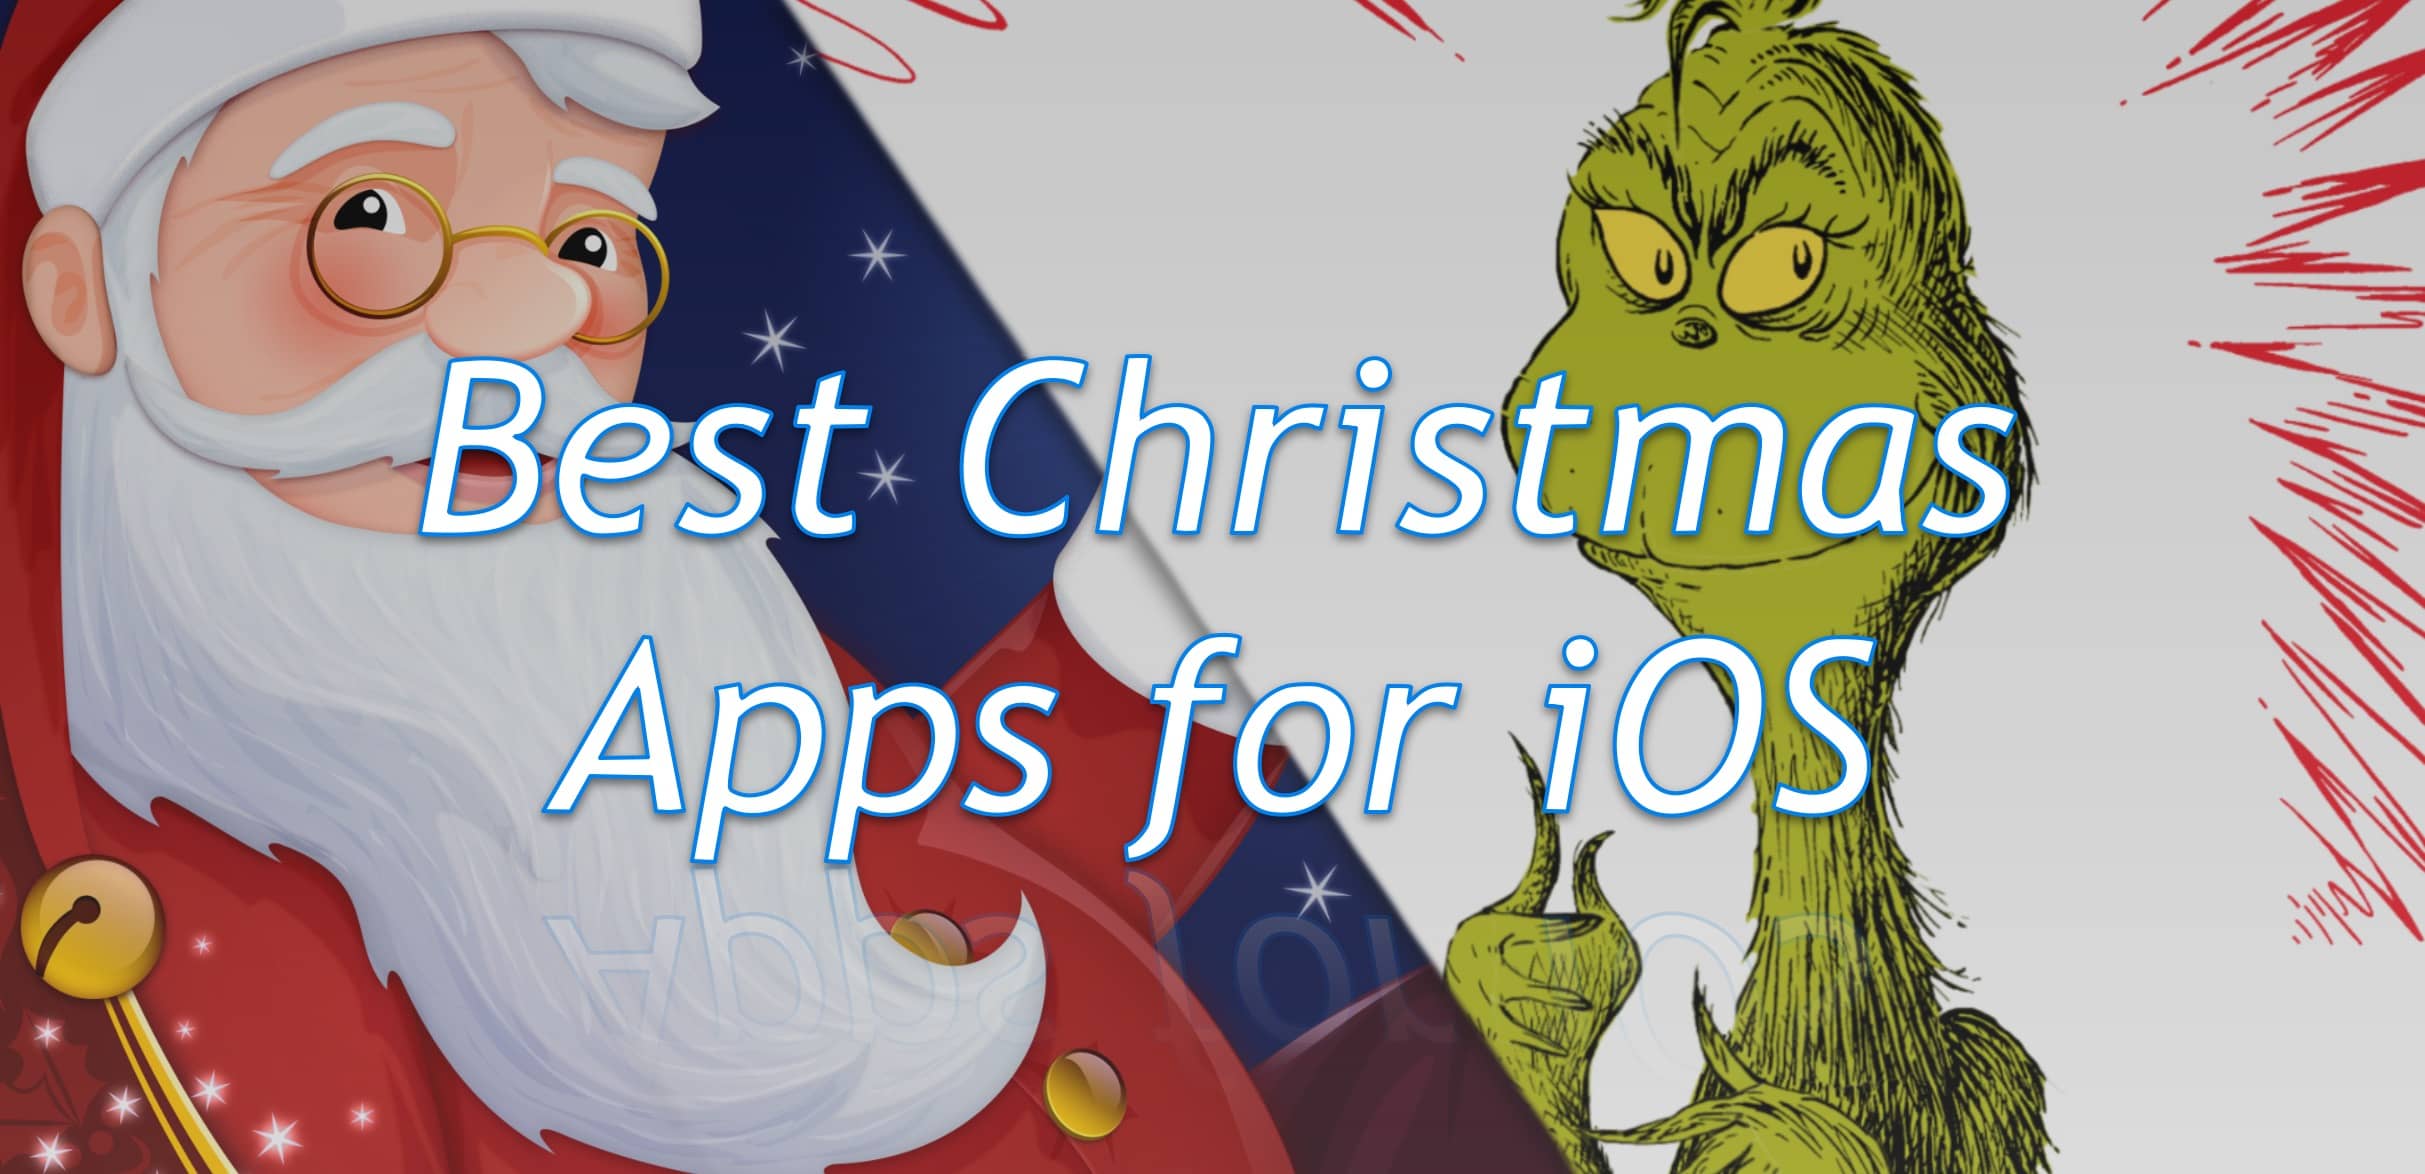 The Best Christmas Apps for iOS